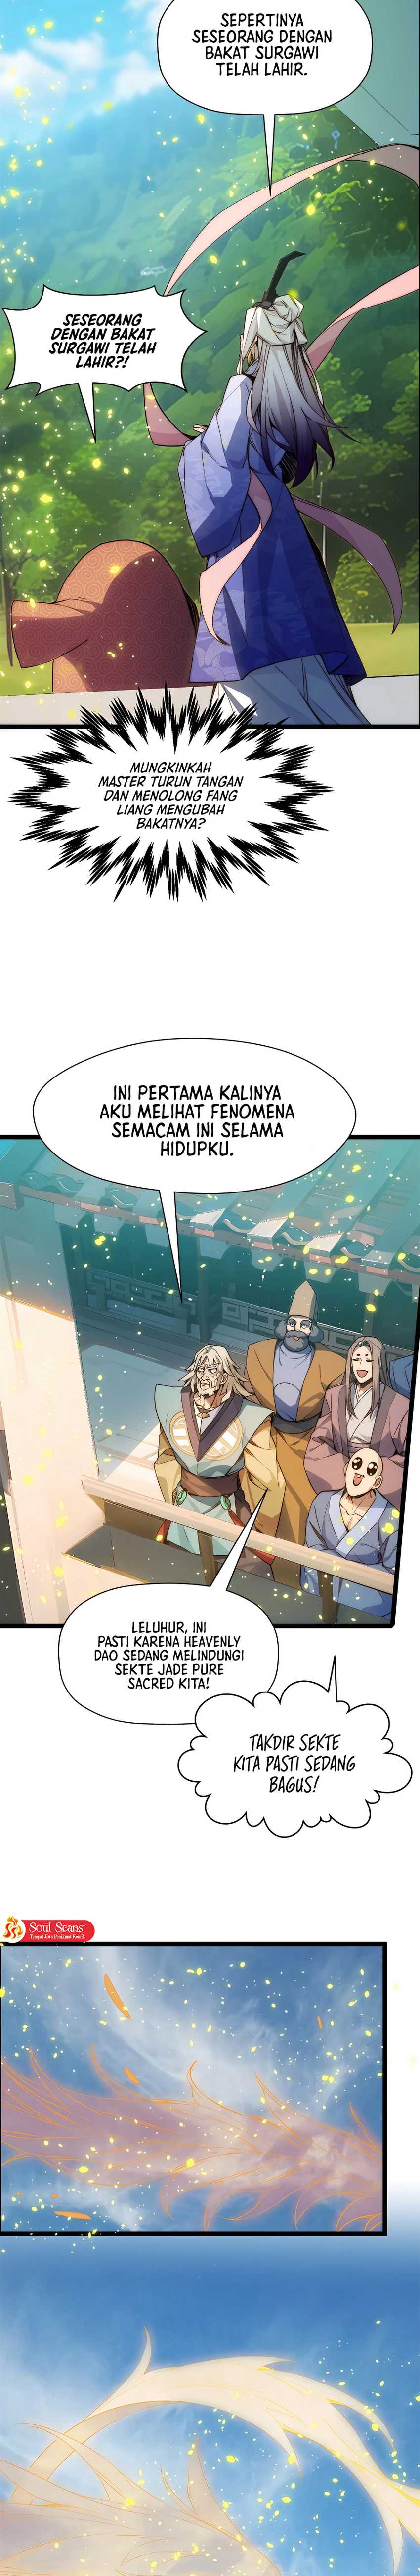 Dilarang COPAS - situs resmi www.mangacanblog.com - Komik top tier providence secretly cultivate for a thousand years 126 - chapter 126 127 Indonesia top tier providence secretly cultivate for a thousand years 126 - chapter 126 Terbaru 22|Baca Manga Komik Indonesia|Mangacan